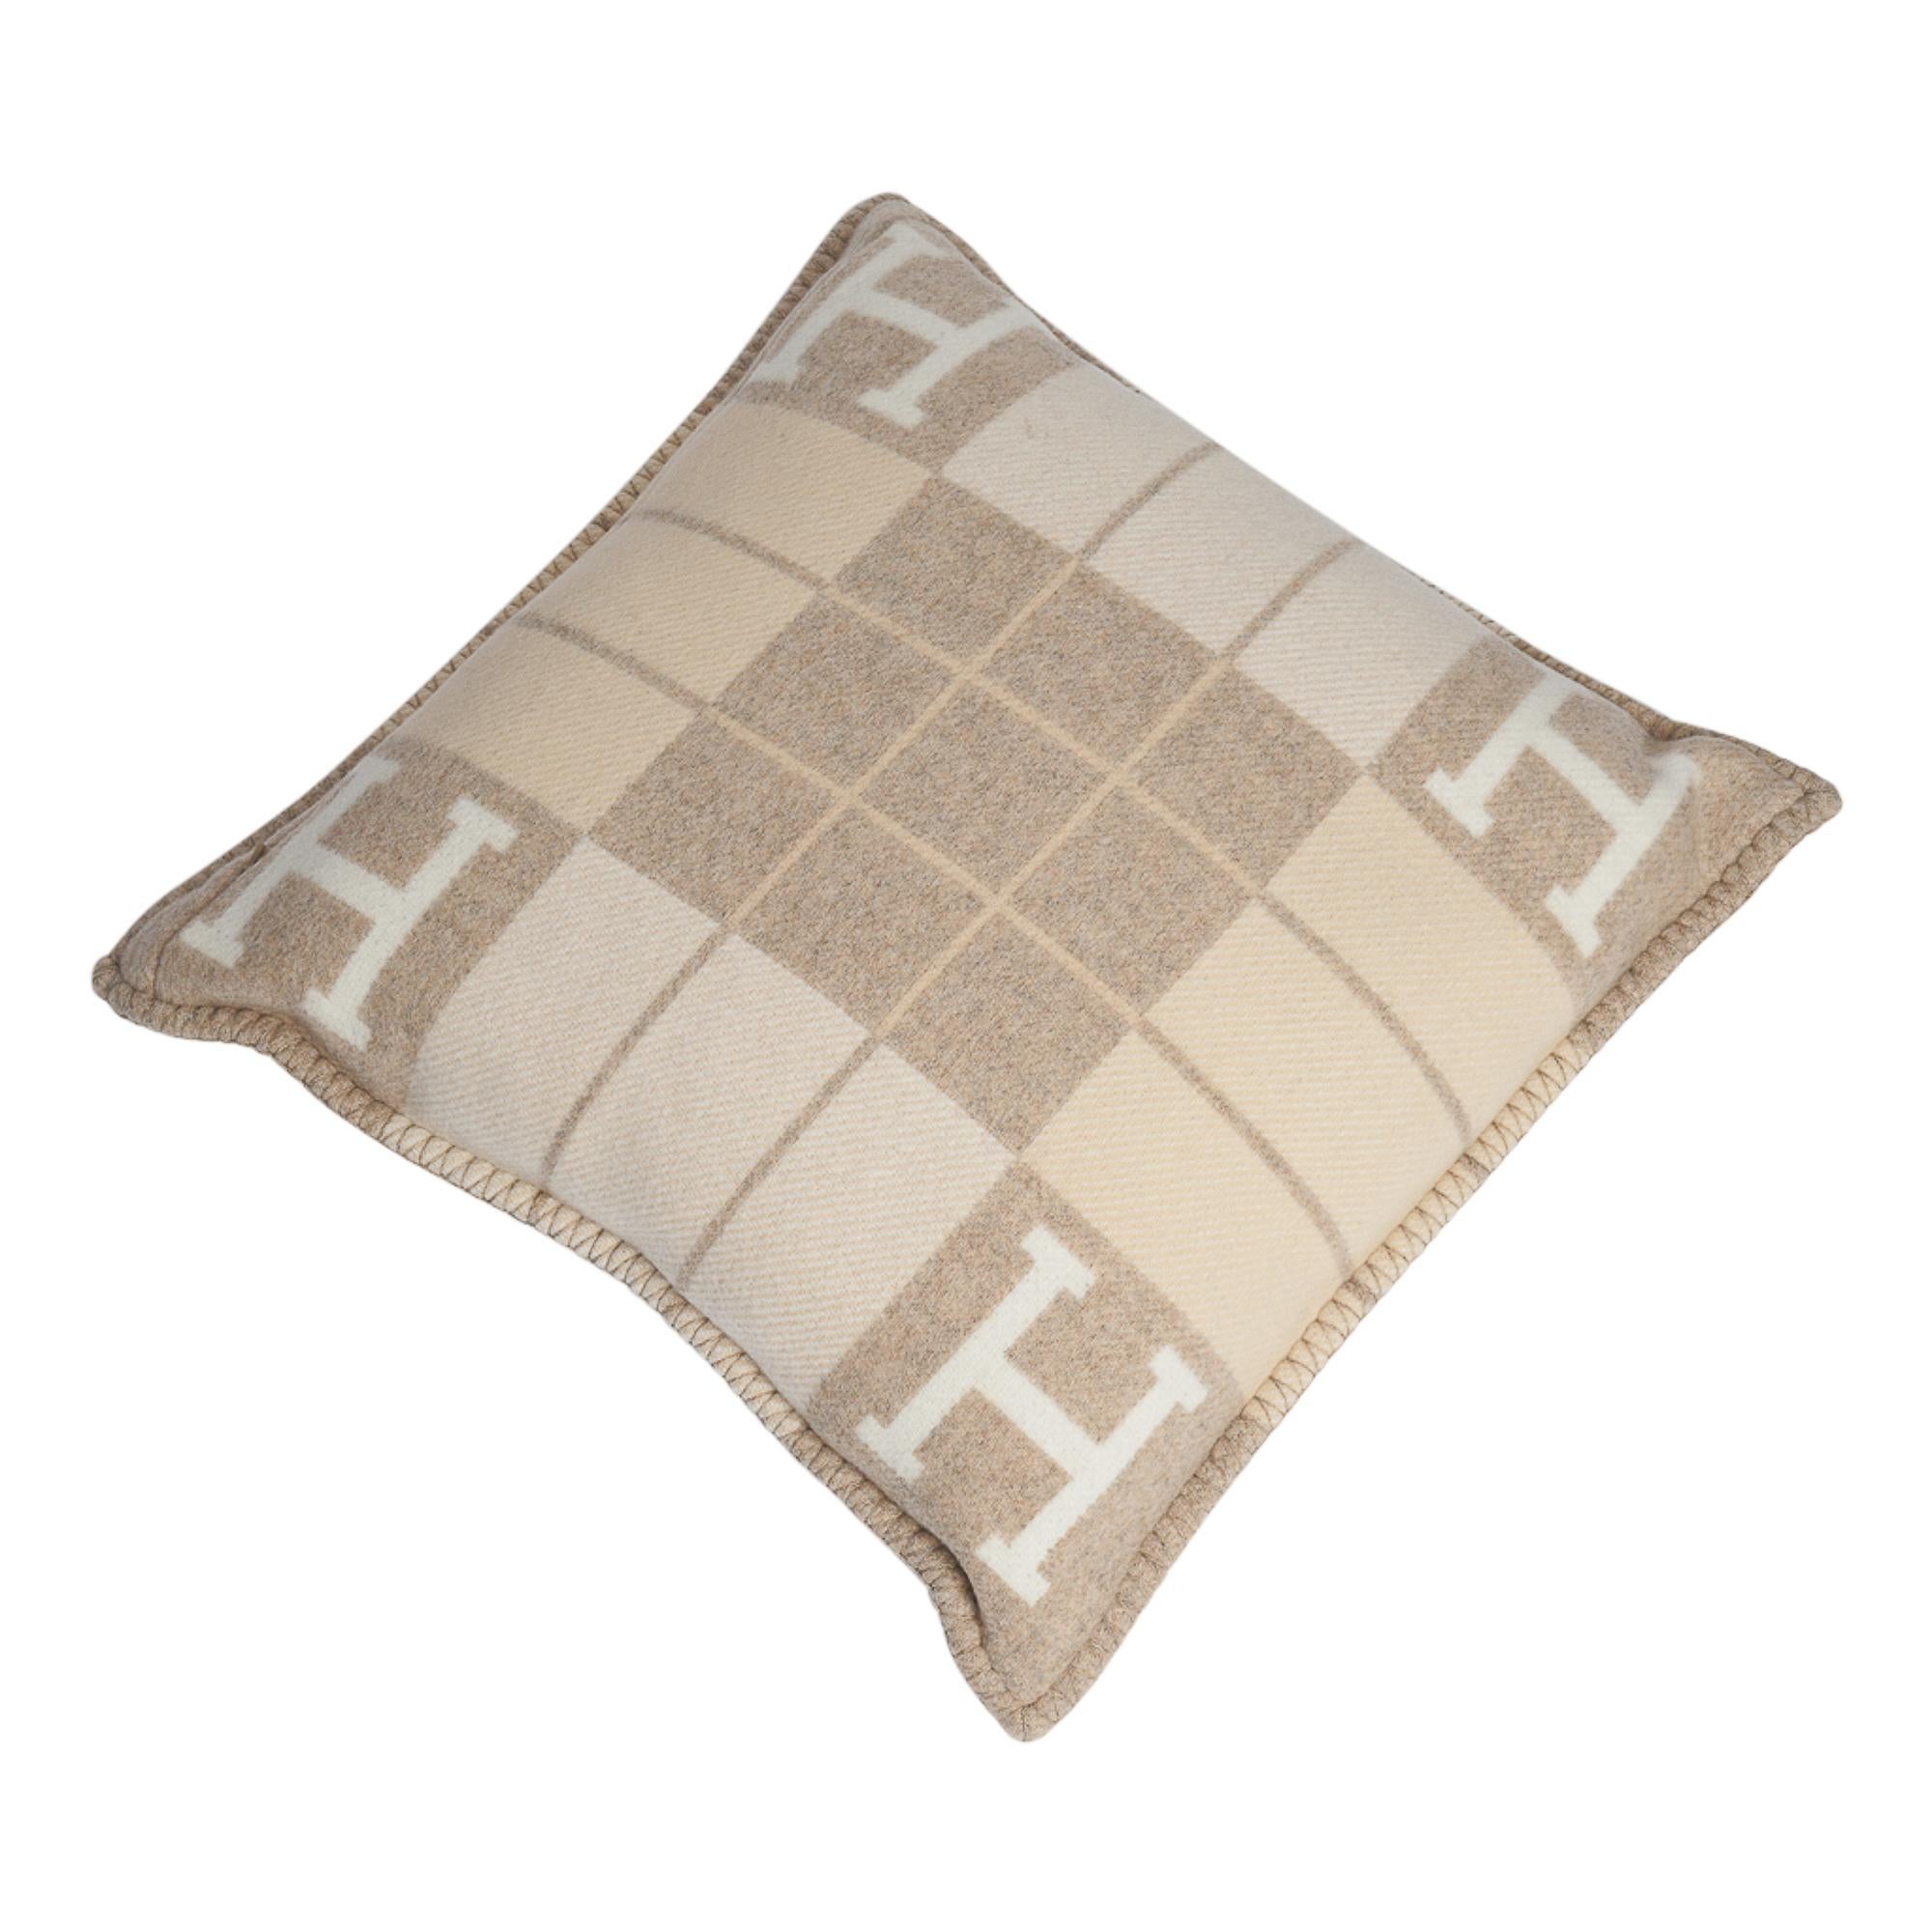 Women's or Men's Hermes Cushion Avalon III PM H Coco and Camomille Throw Pillow New